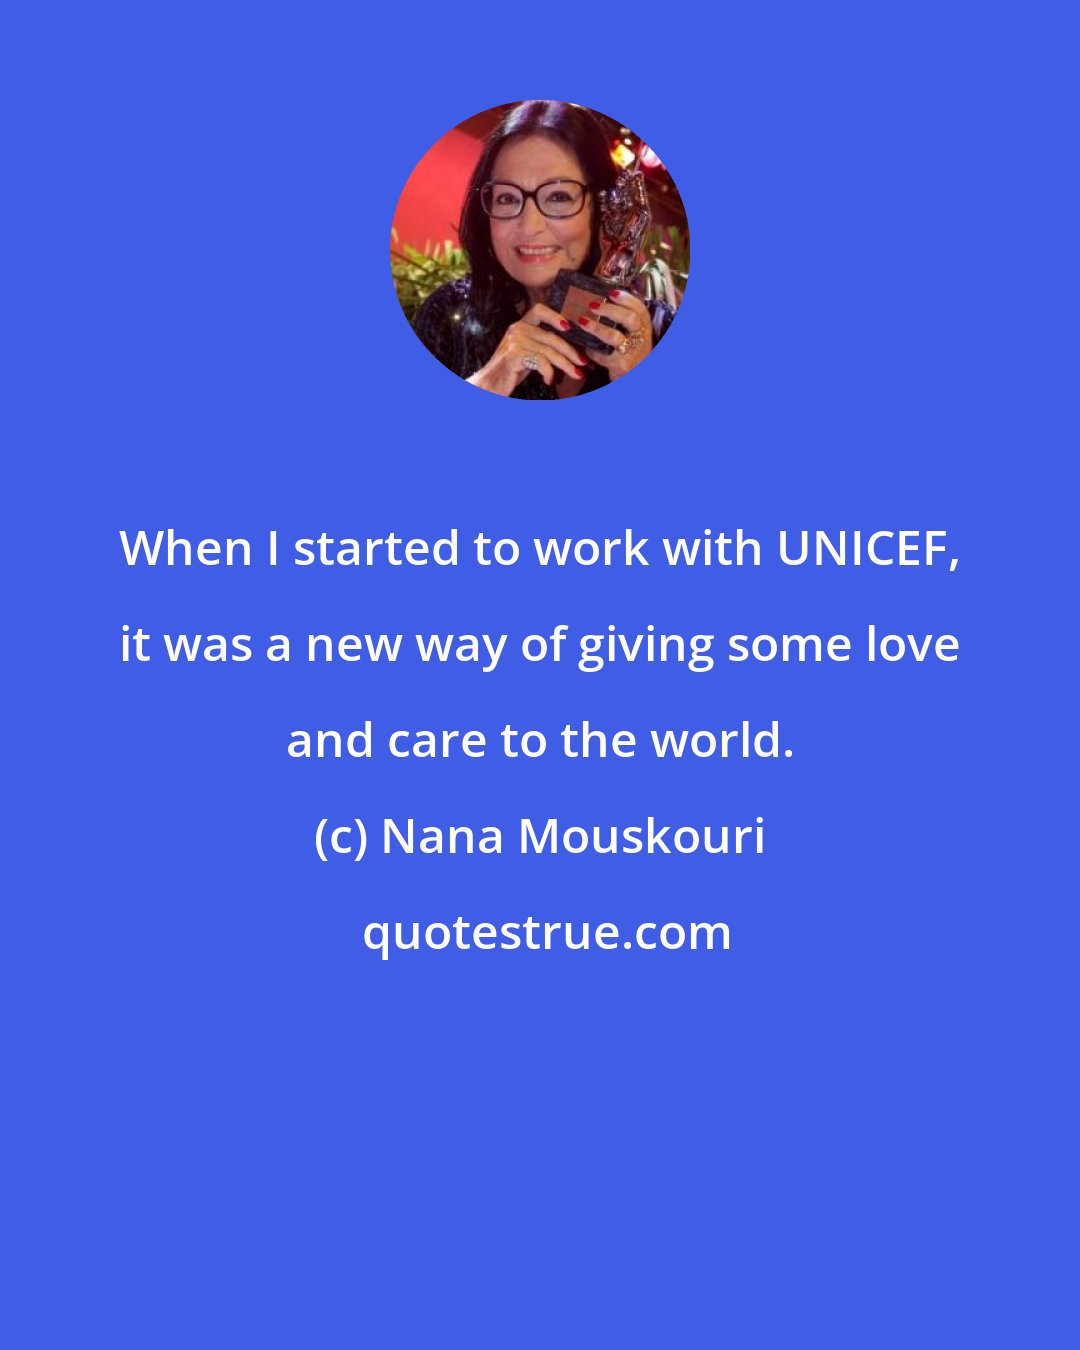 Nana Mouskouri: When I started to work with UNICEF, it was a new way of giving some love and care to the world.